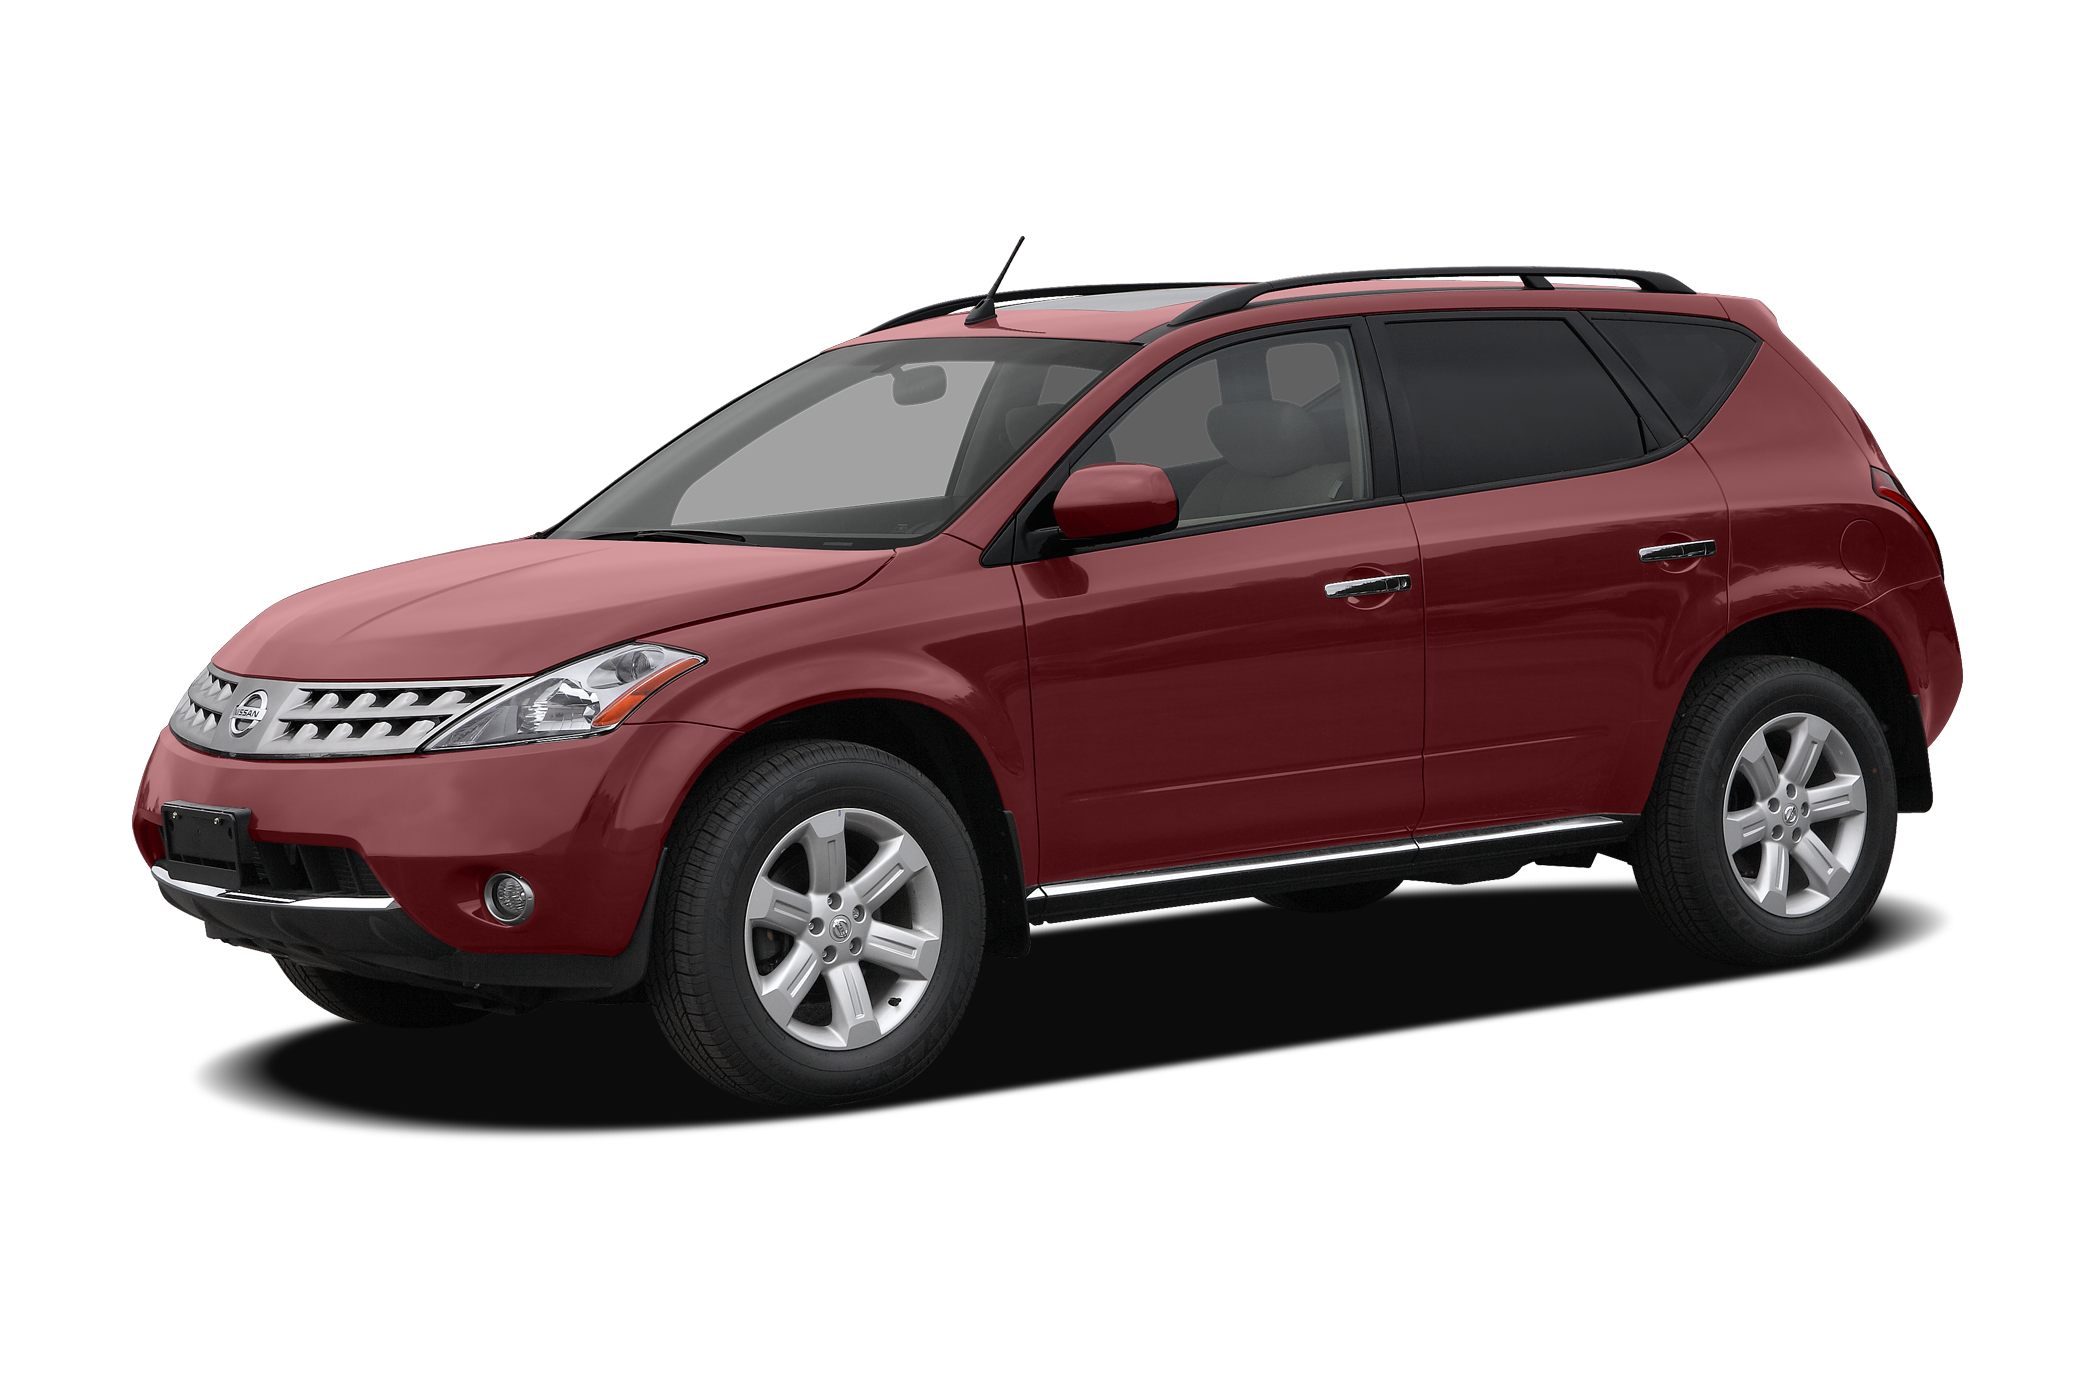 2007 Nissan Murano Sl 4dr All Wheel Drive Pictures